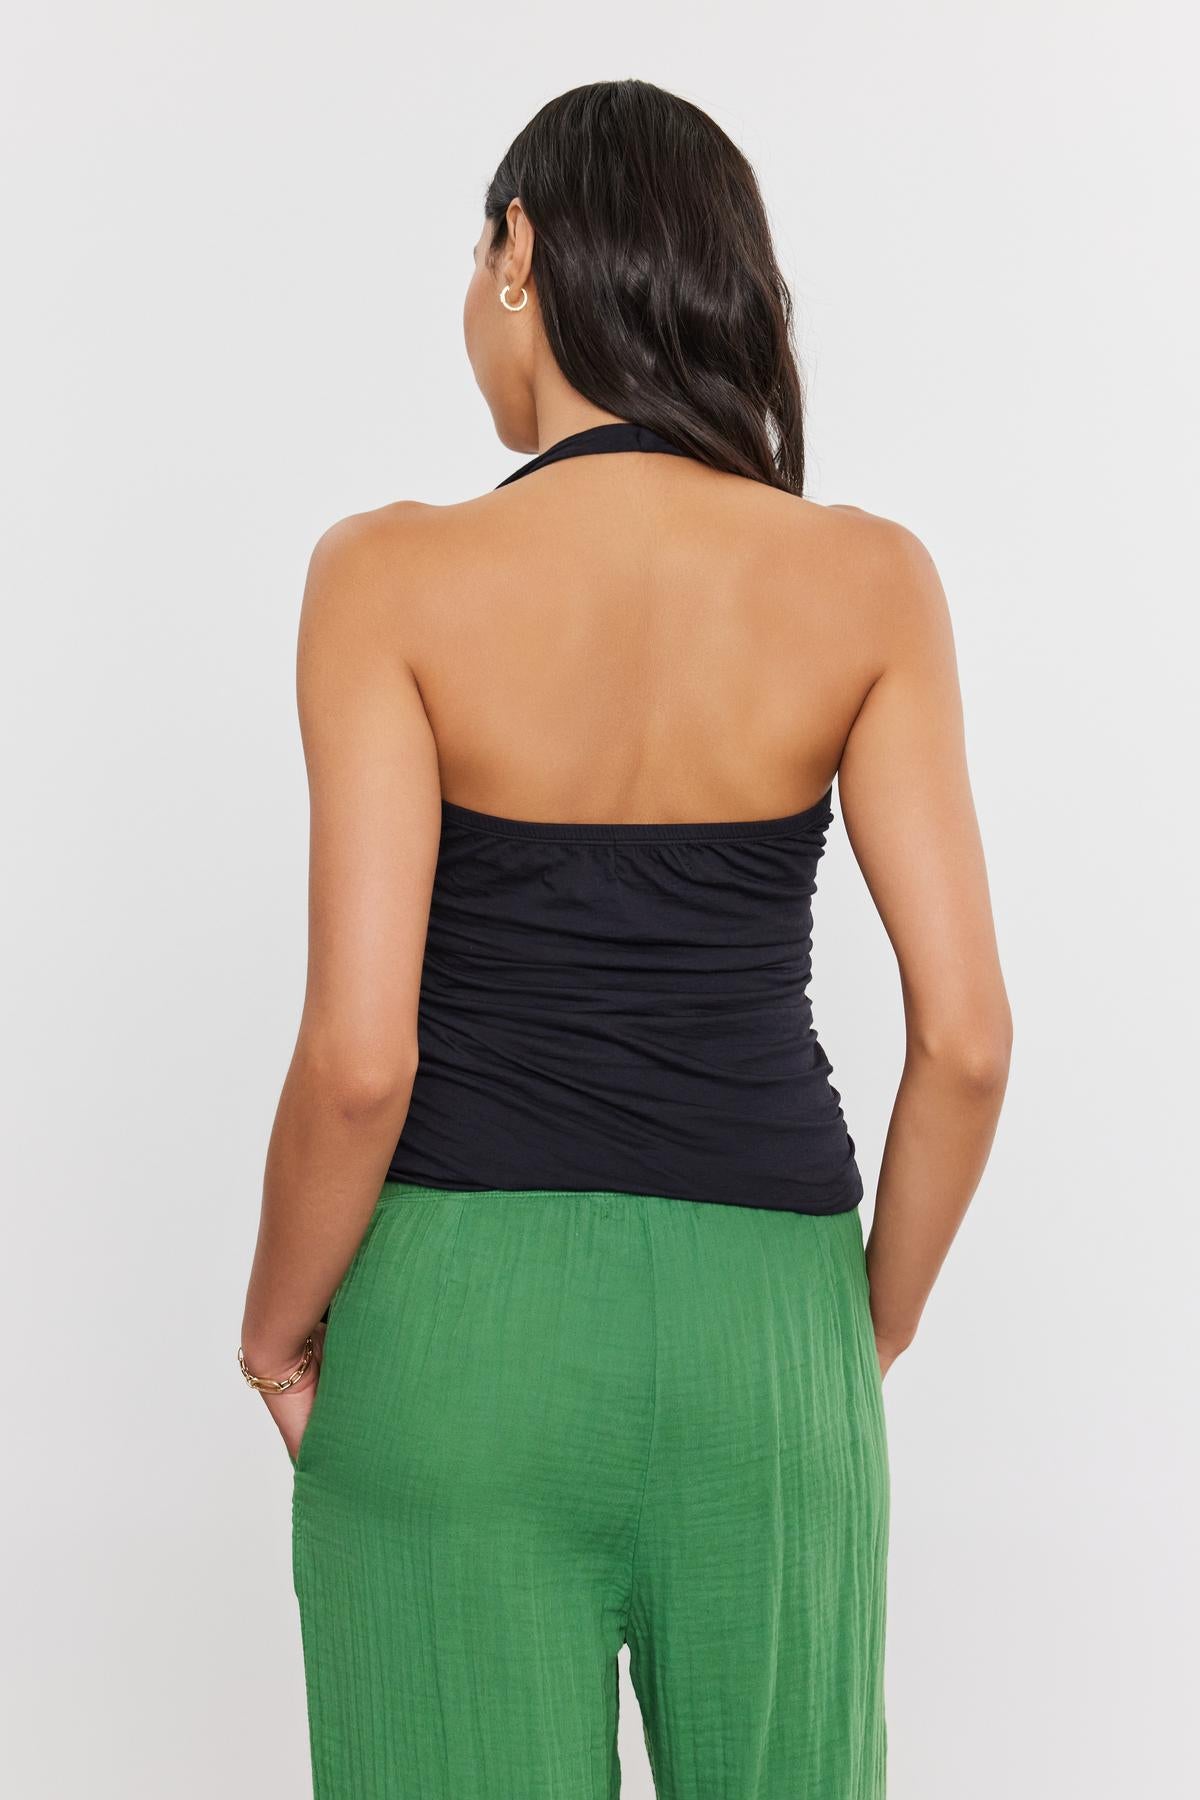 A person with long dark hair is shown from behind, wearing a Velvet by Graham & Spencer WHITLEY TANK TOP and green pants against a white background.-37402895417537